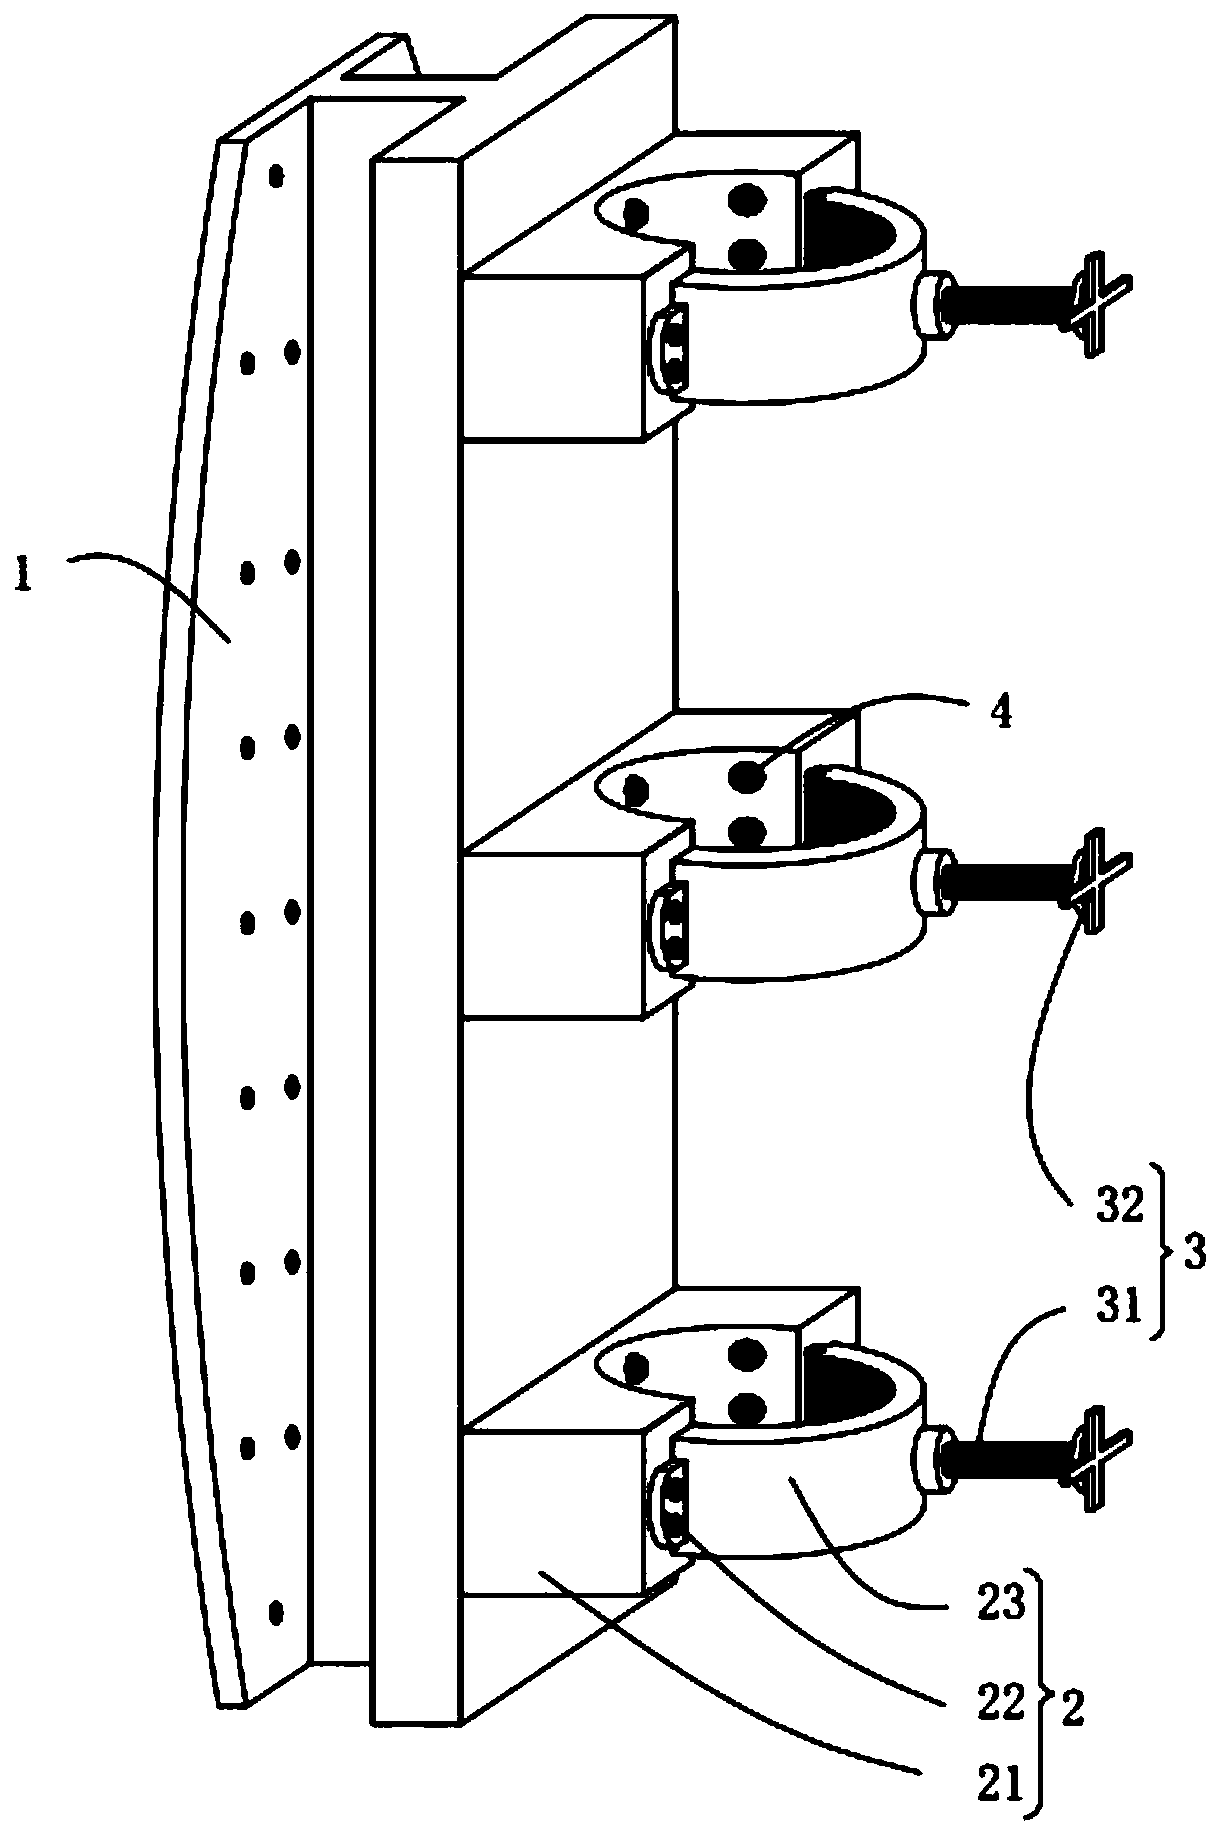 Method for improving connection reliability of ultra-deepwater drilling ship and high-pressure mud pipe